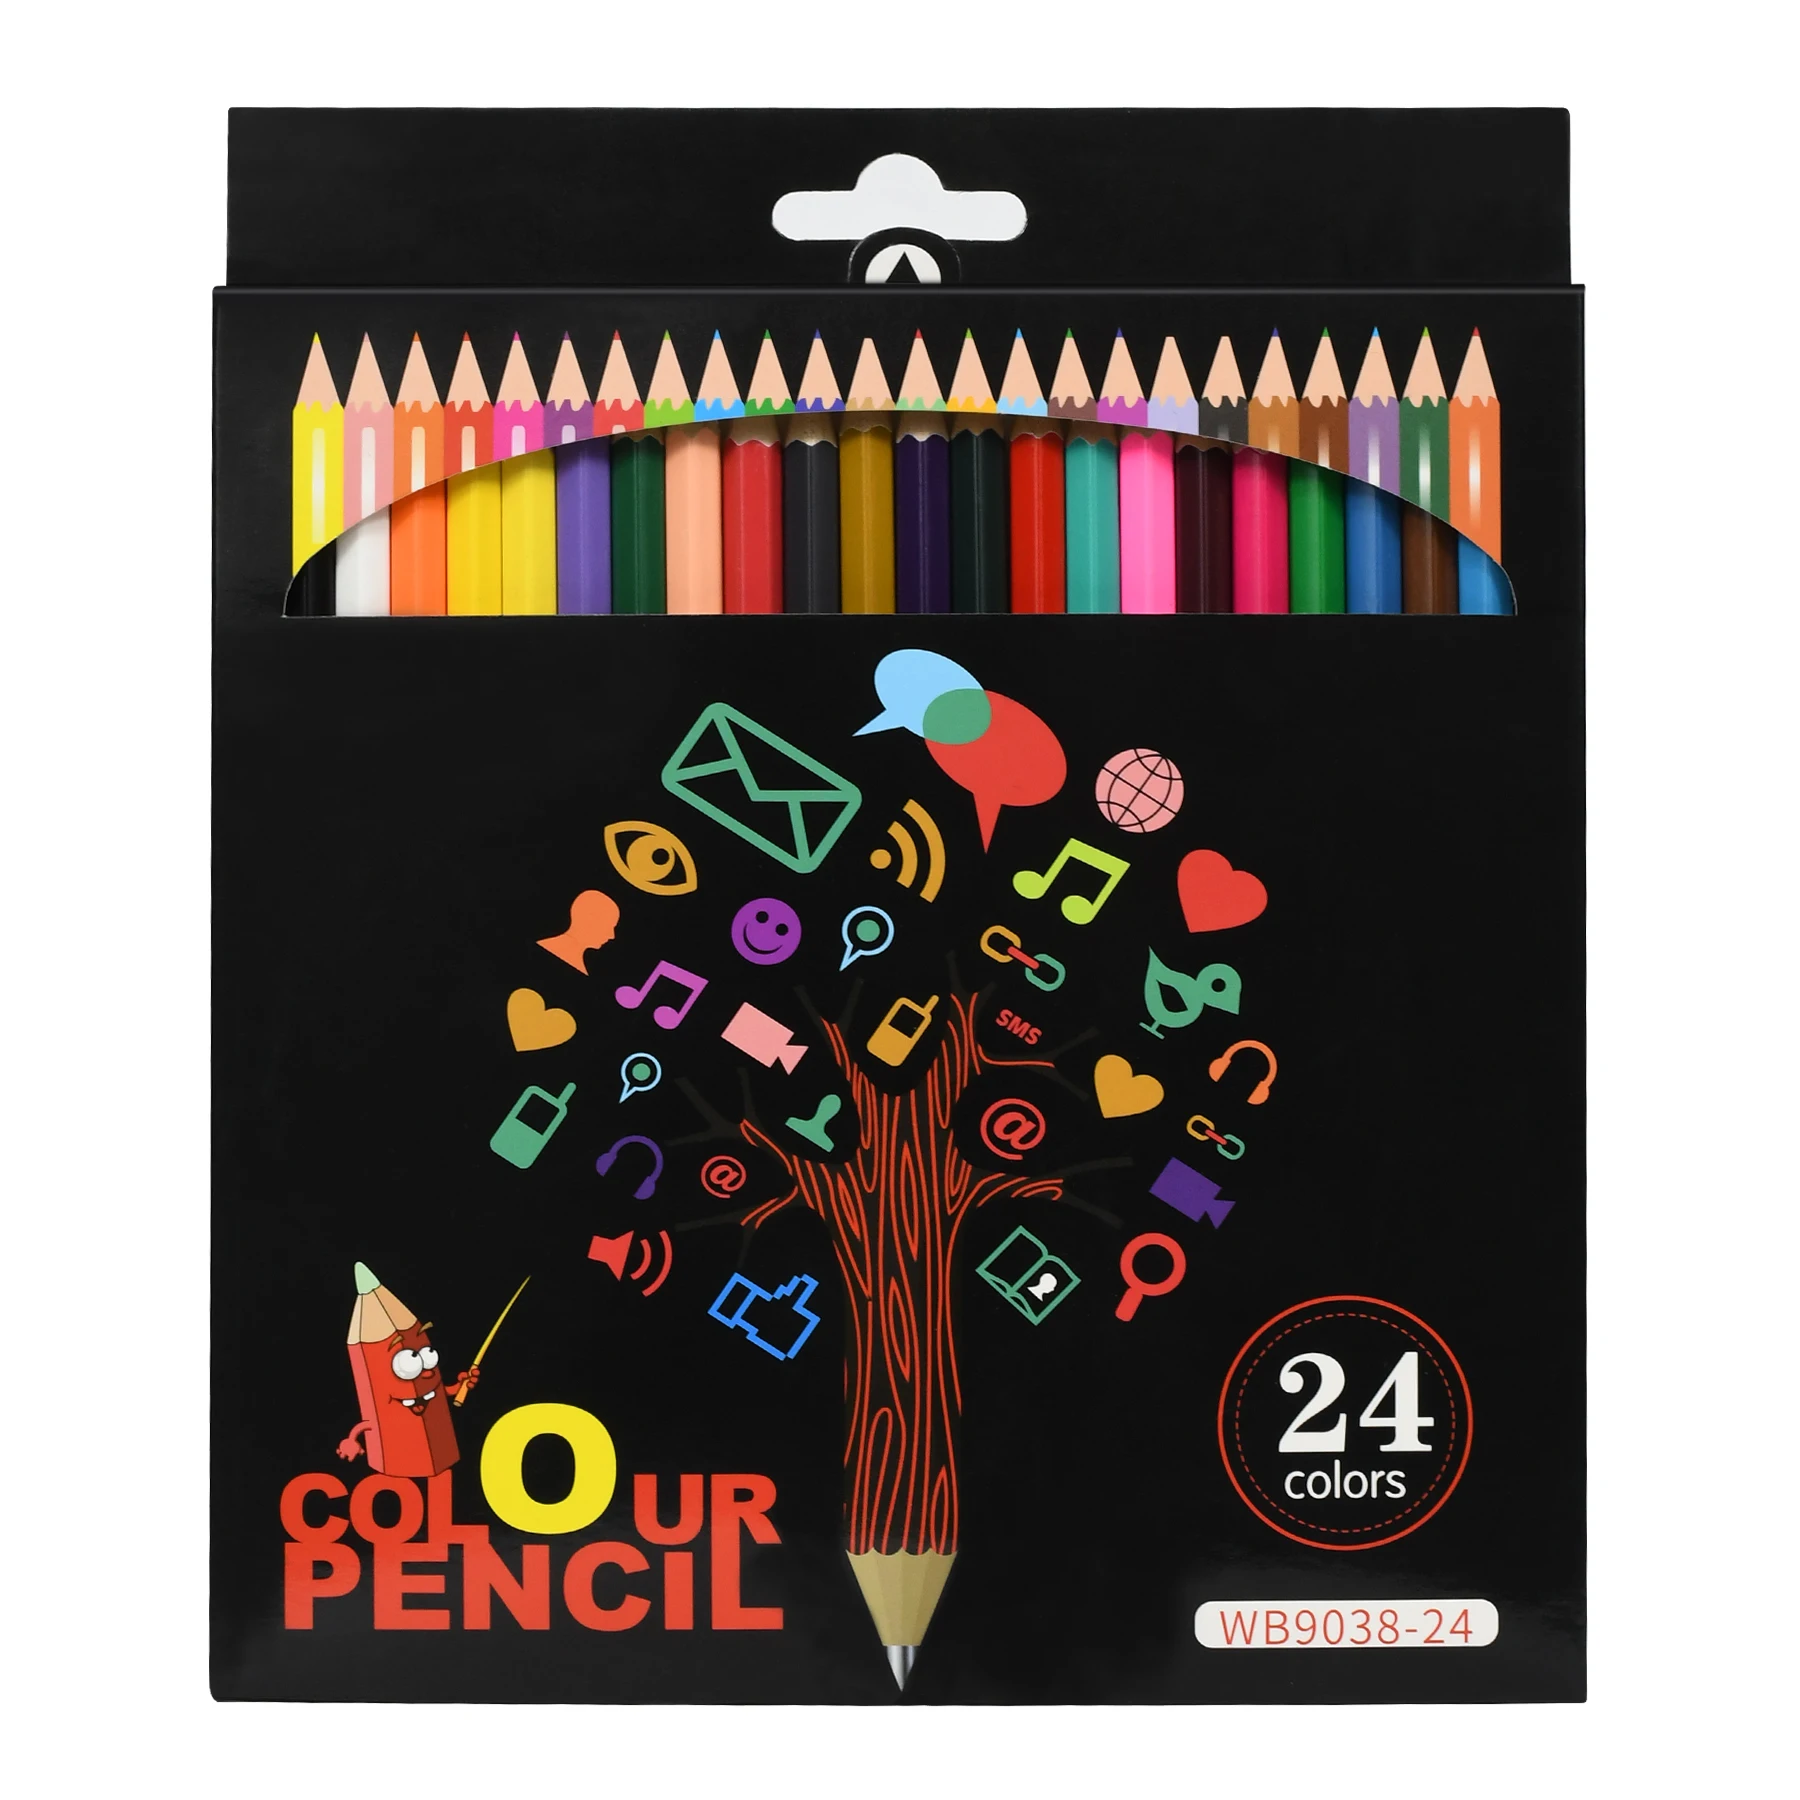 24 Colors Oily Color Pencil Artistic Color Lead Brush Sketch Wood Pencils Set Hand-Painted School Supplies gift for kids 24 36 48 72 colors water soluble colored oily pencil beginner hand painted art painting pen curtain set